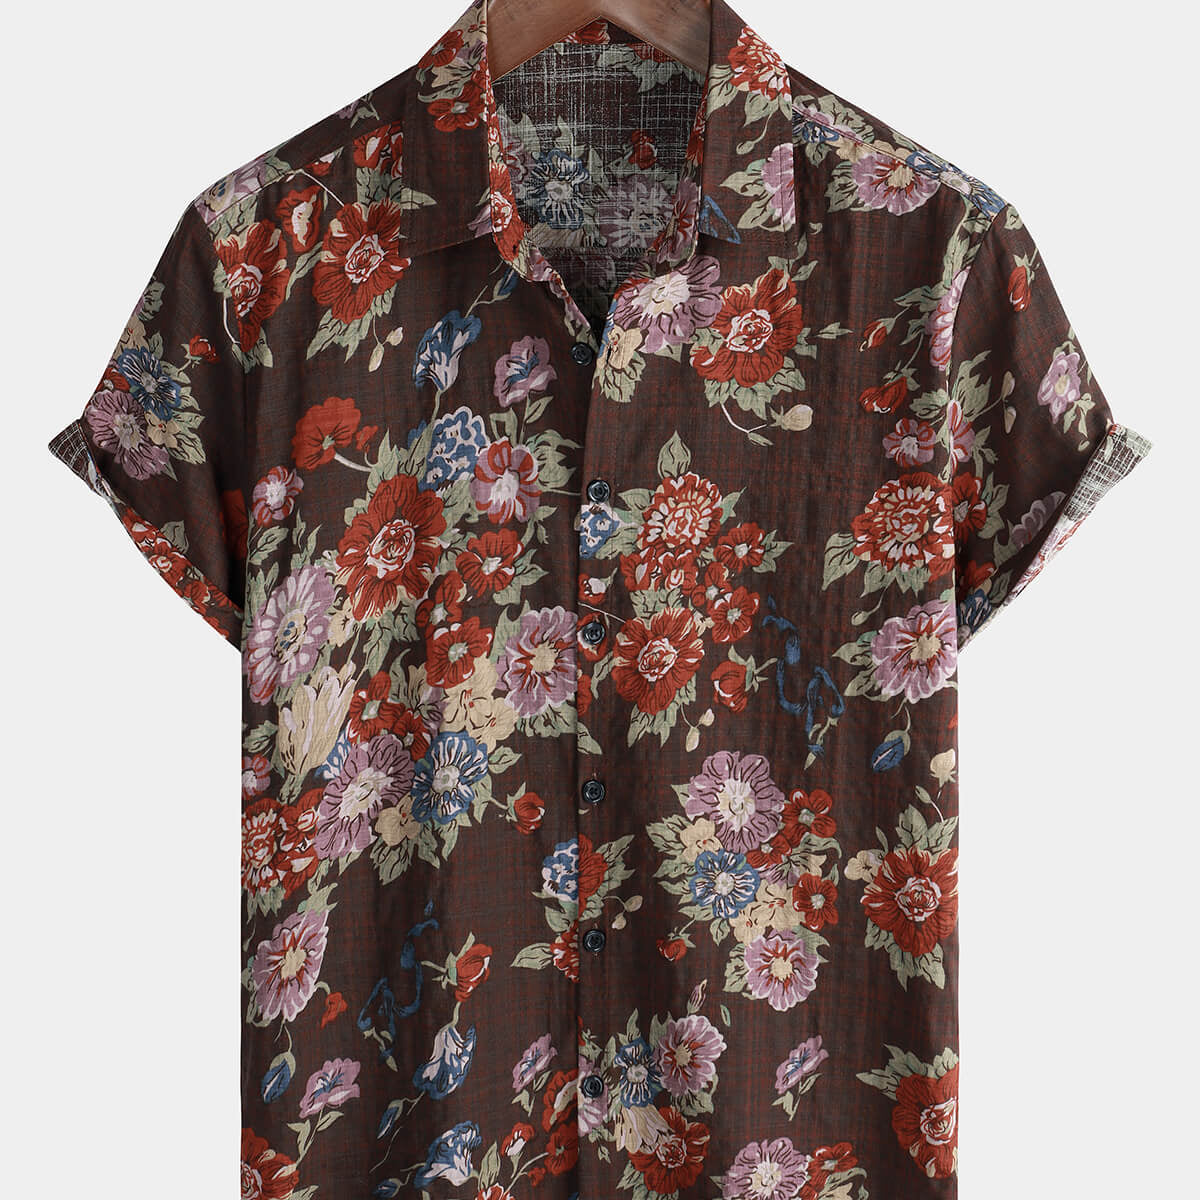 Men's Casual Vintage Holiday Cotton Retro Floral Button Up Short Sleeve Shirt